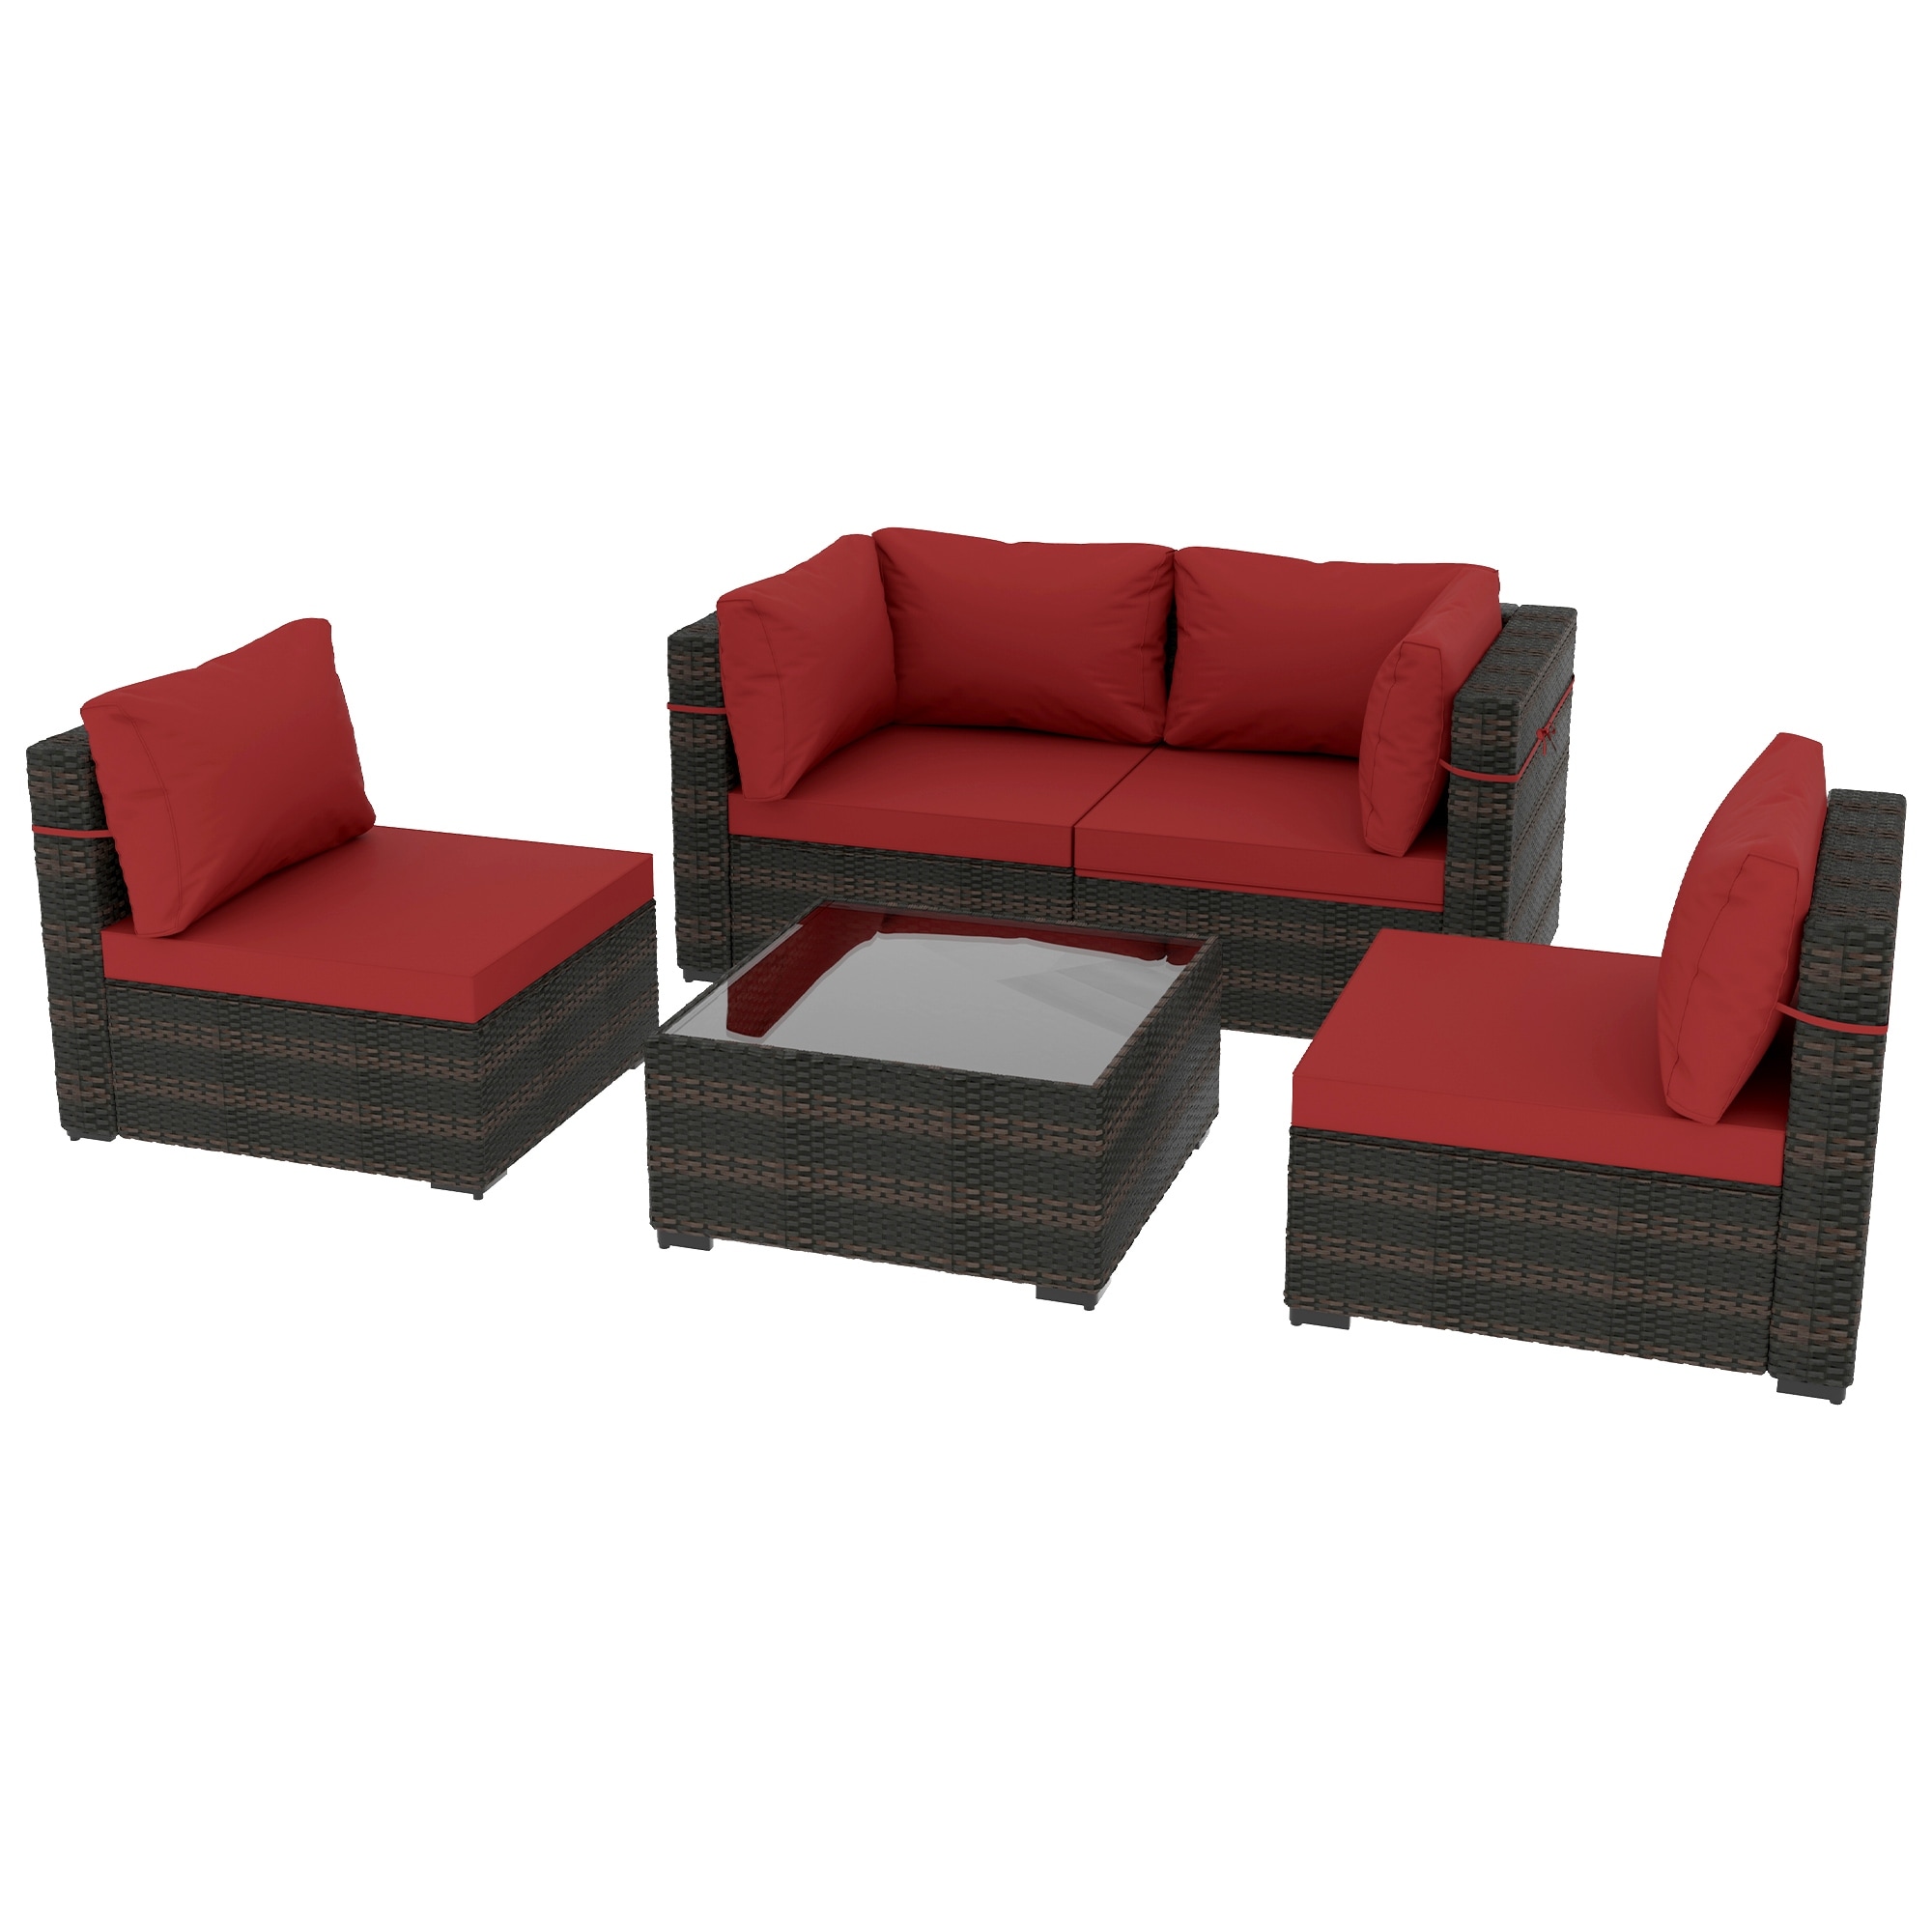 5 Pieces Patio Conversation Furniture Sectional Seating Group With Cushions